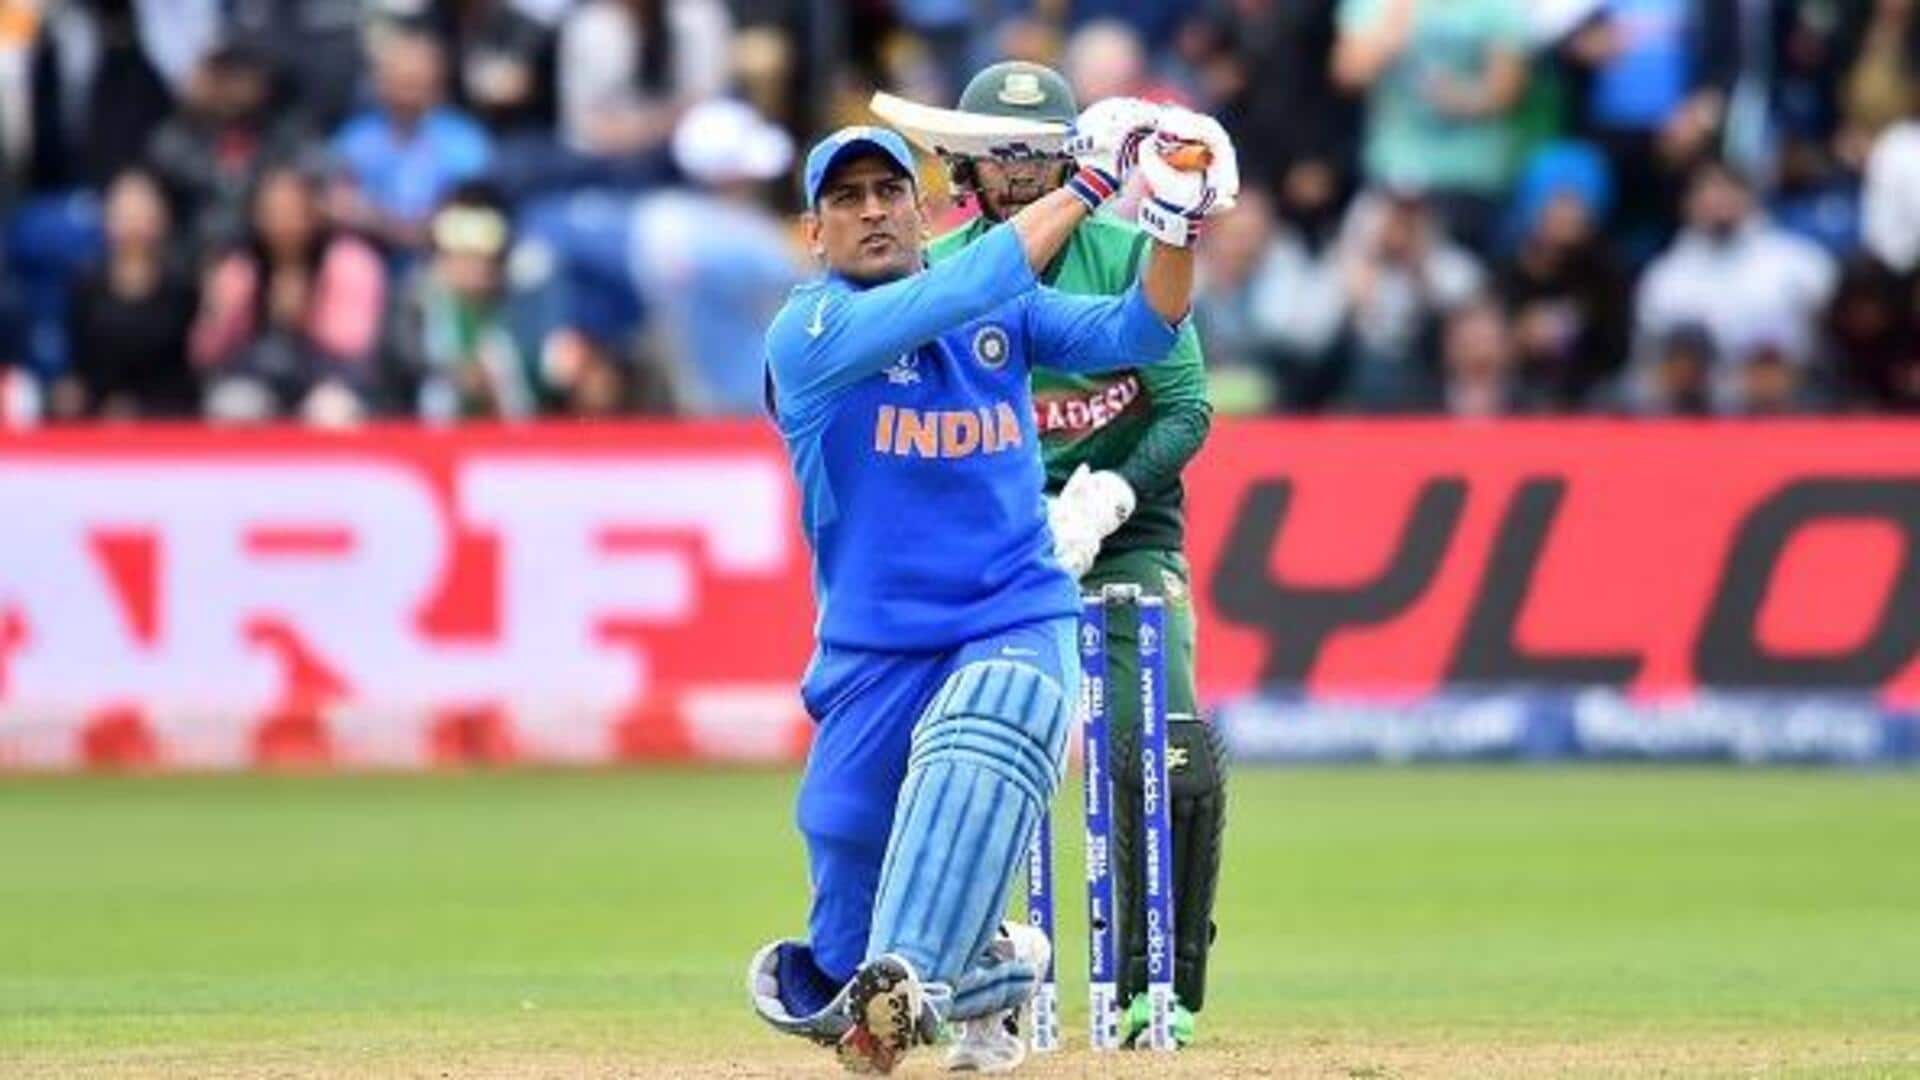 BCCI retires MS Dhoni's number seven jersey: Report